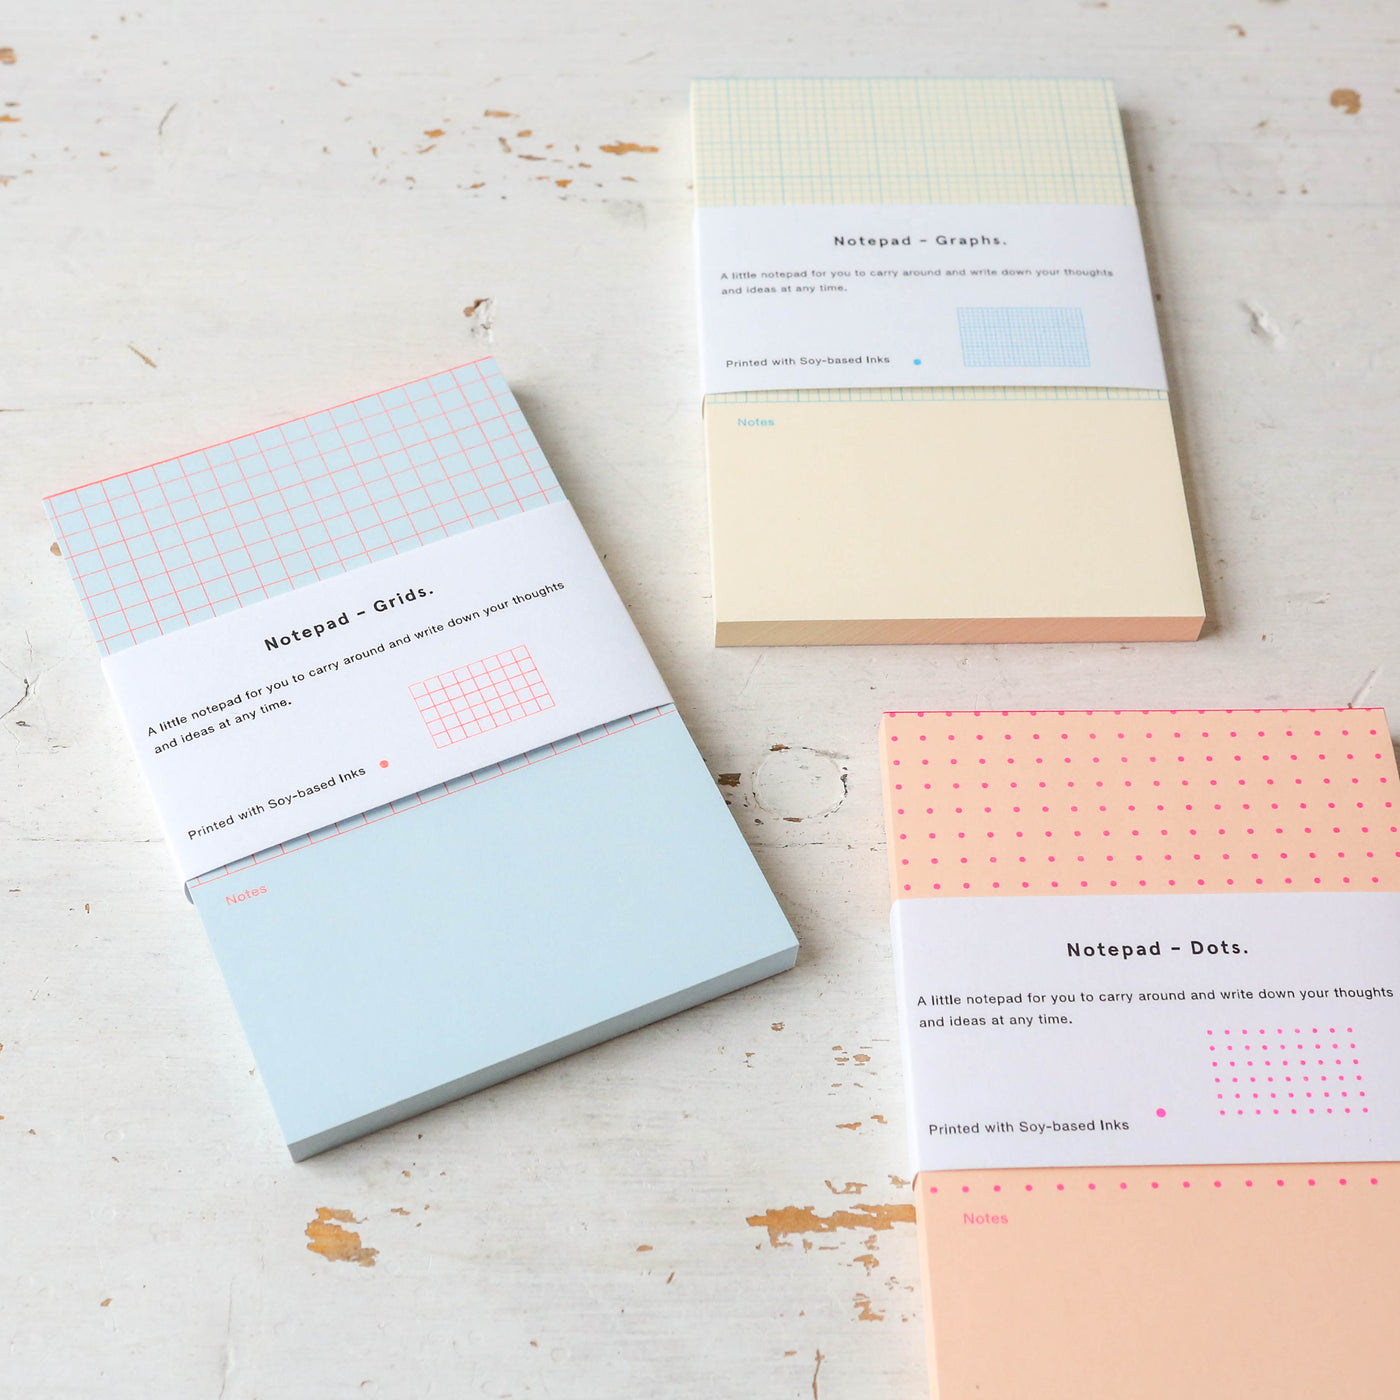 Mini Notepads - Grids, Graphs or Dots